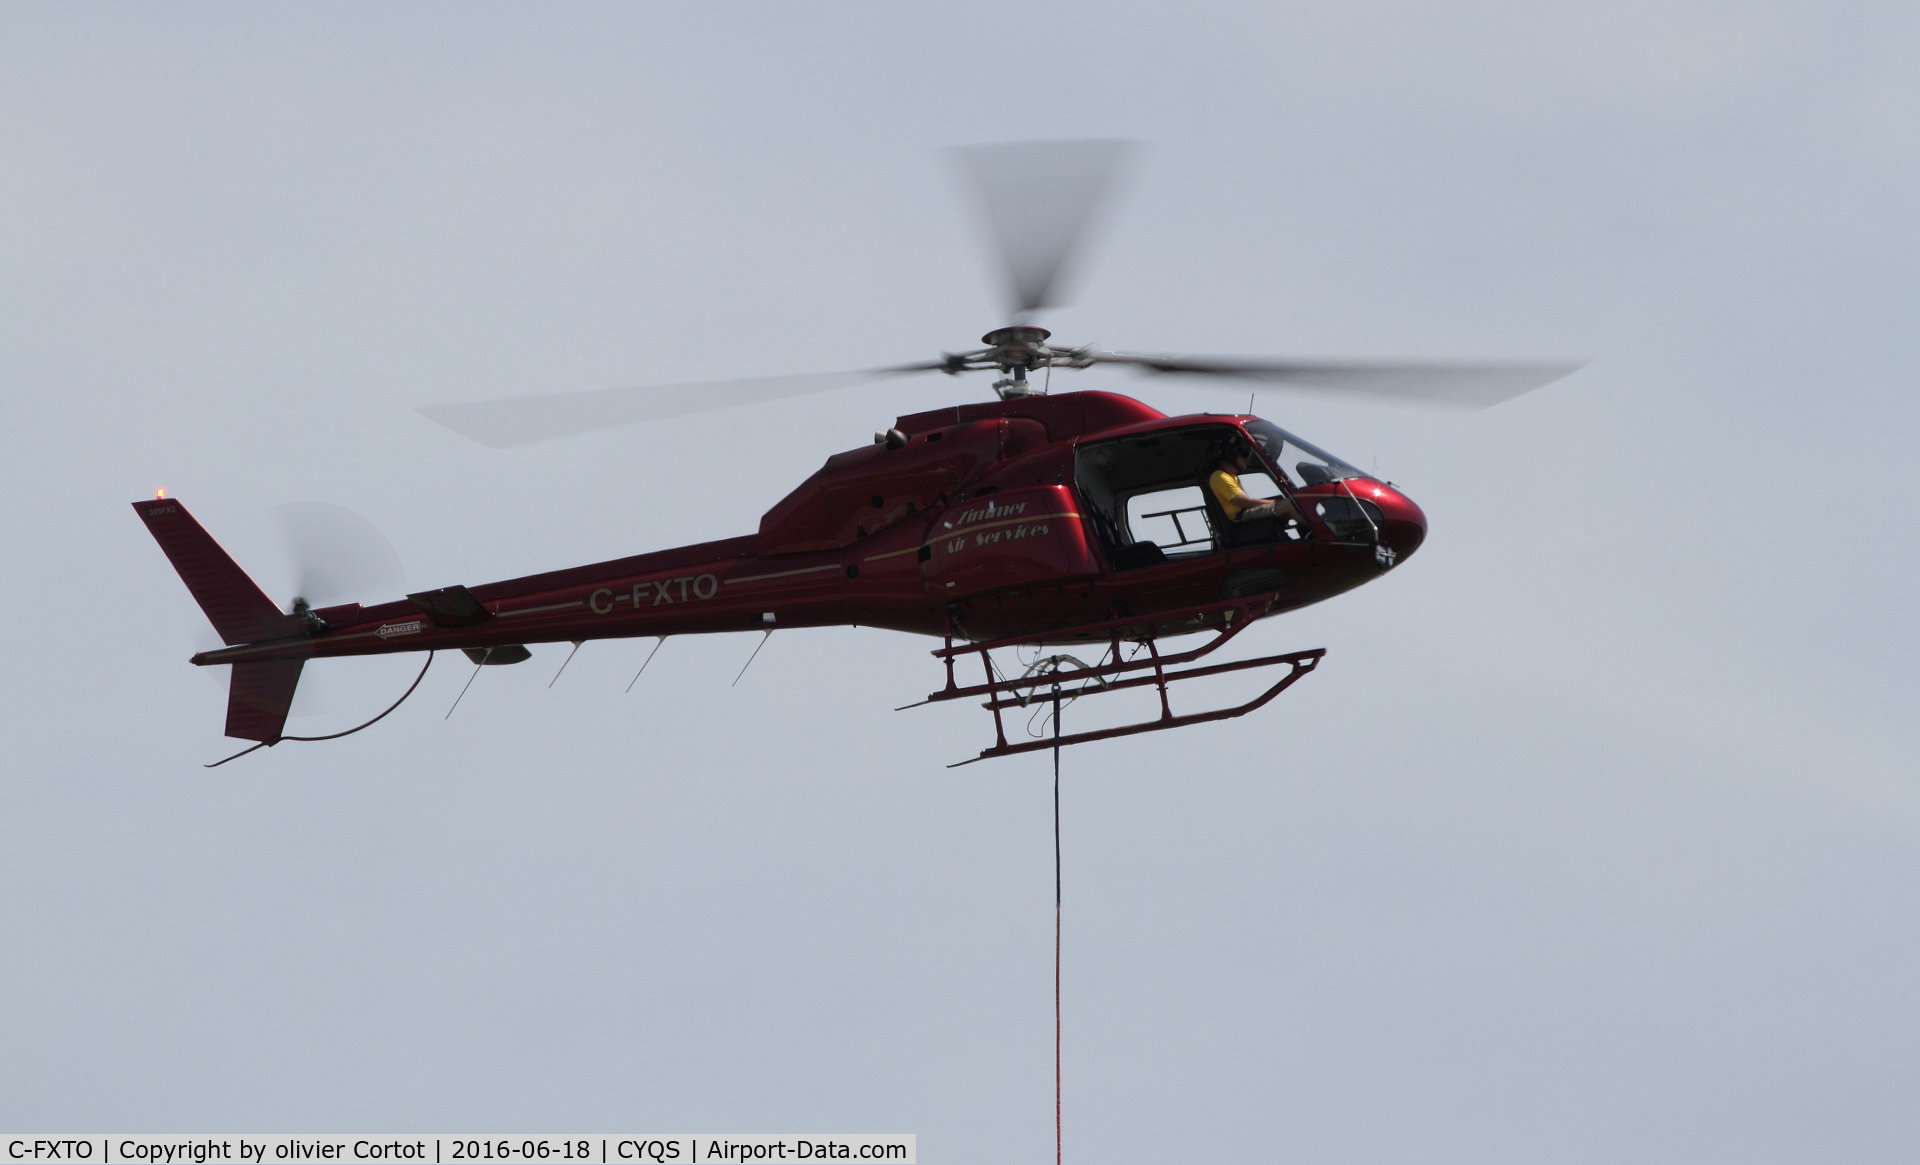 C-FXTO, 1981 Aerospatiale AS-355F-2 Ecureuil 2 C/N 5087, about to drop a car during the 2016 St Thomas airshow !